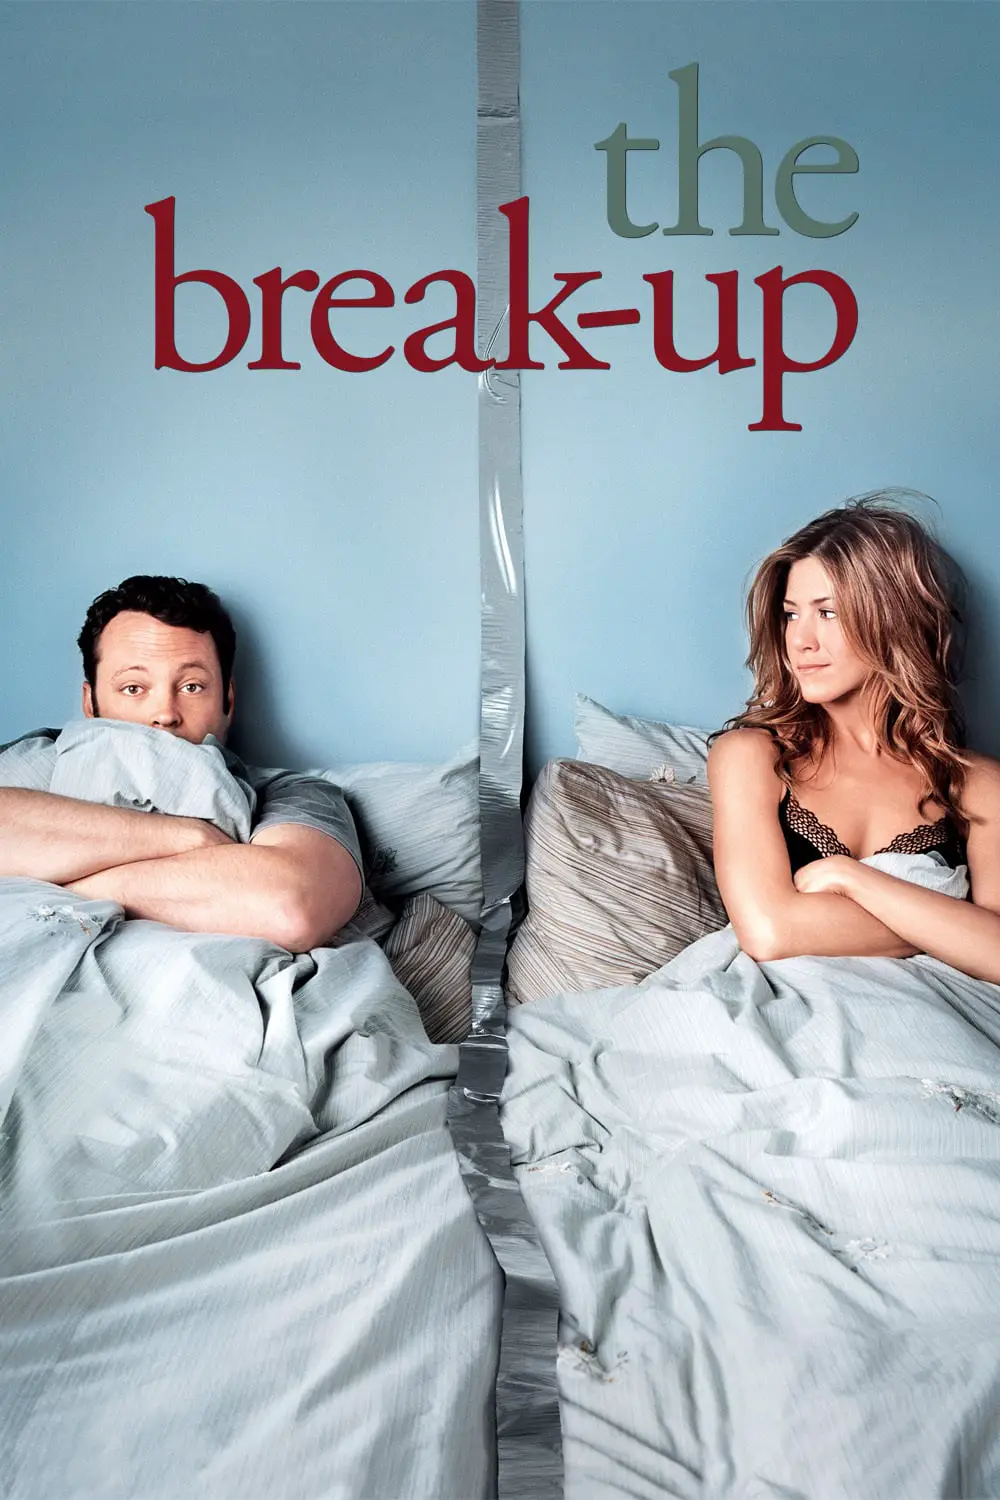 You are currently viewing The Break-Up